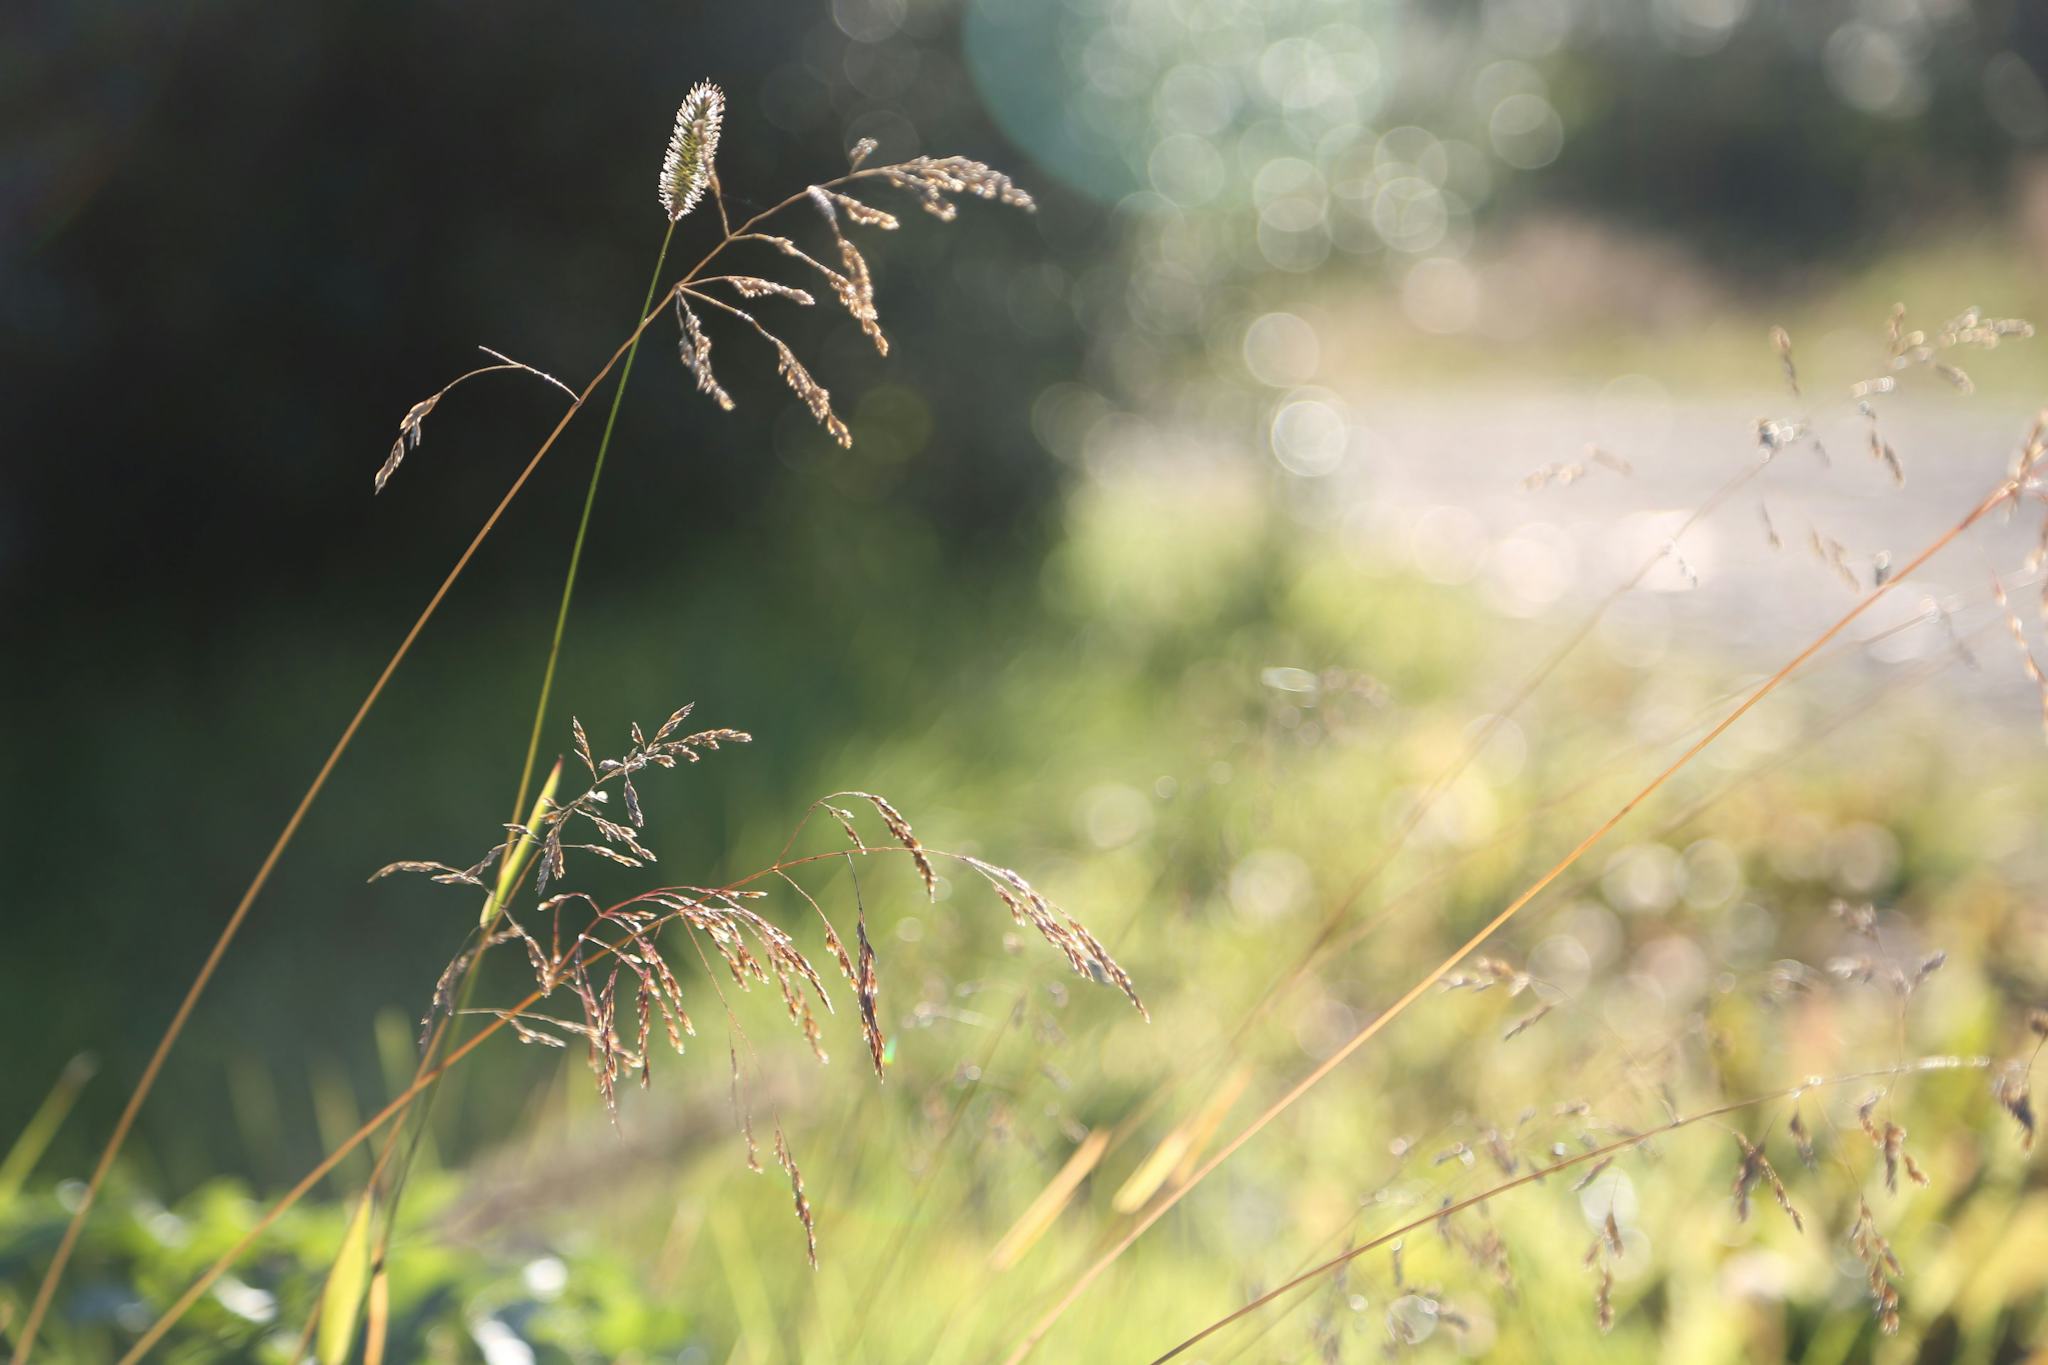 A close up photo of delicate grass backlit by sunlight, creating blurry effect in the background